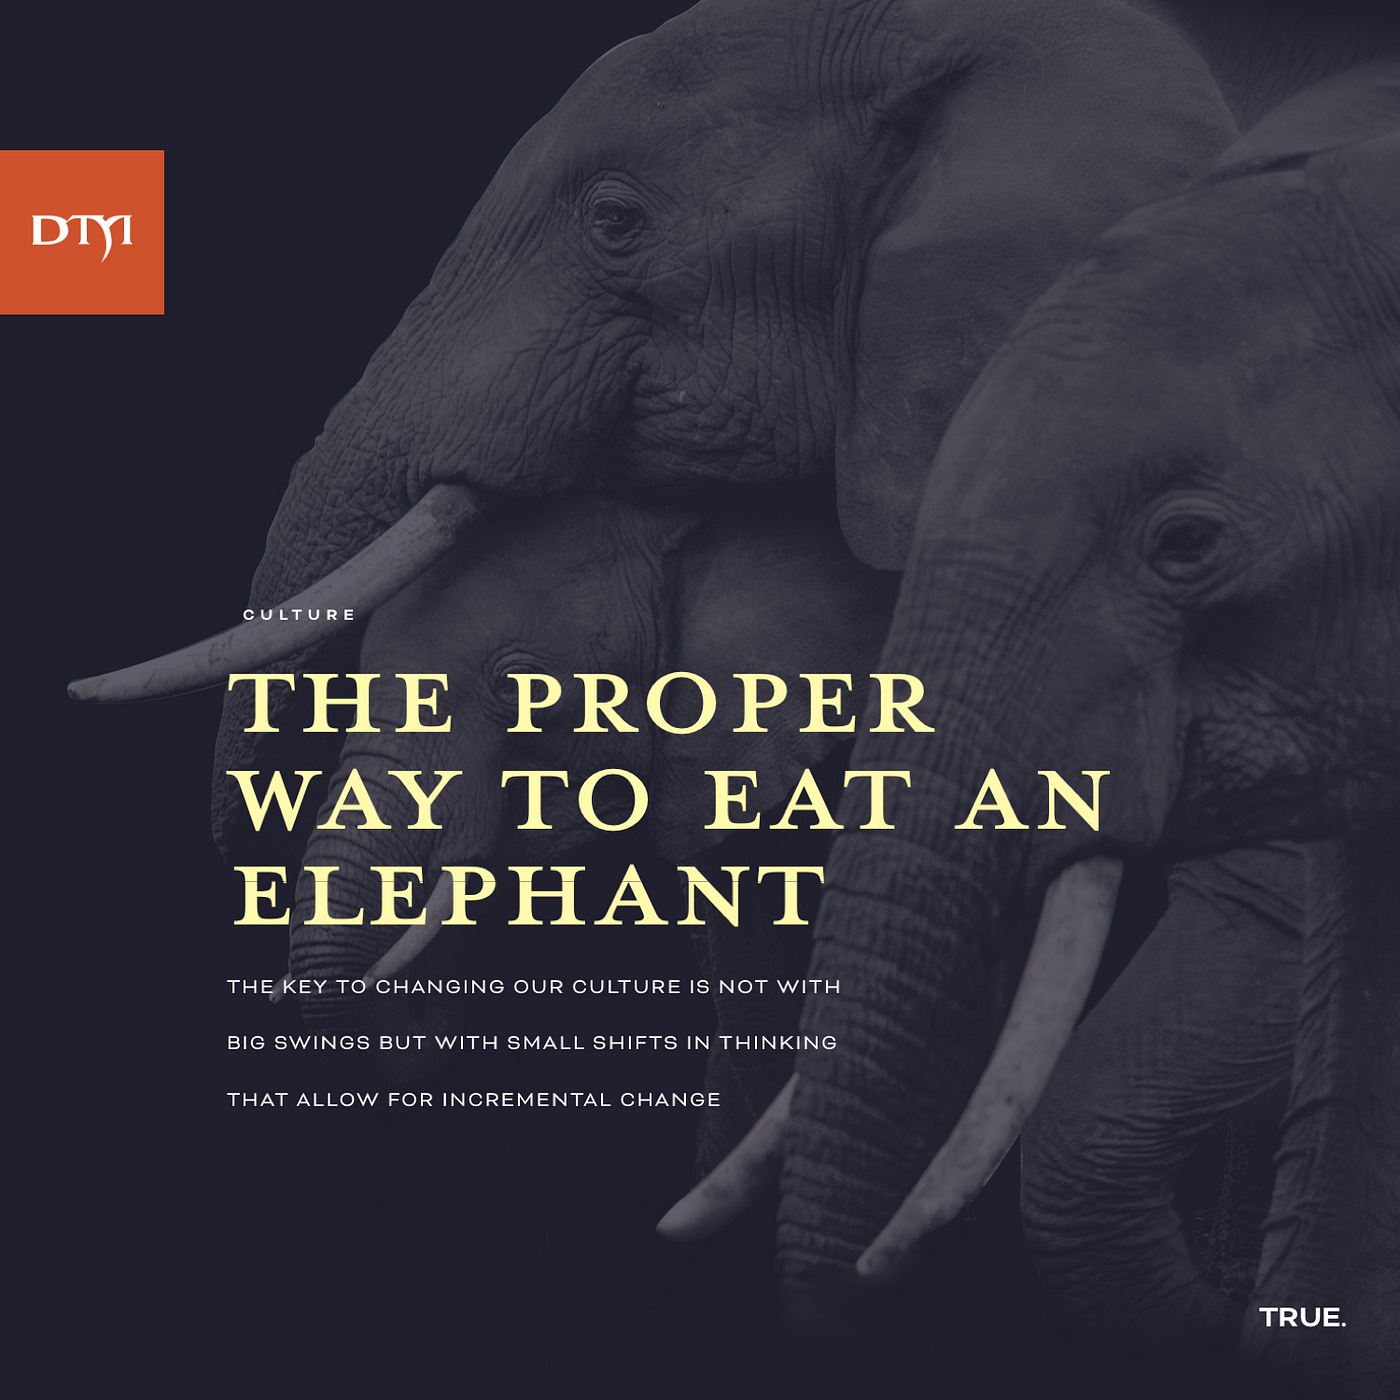 How to grow innovation elephants in large organizations